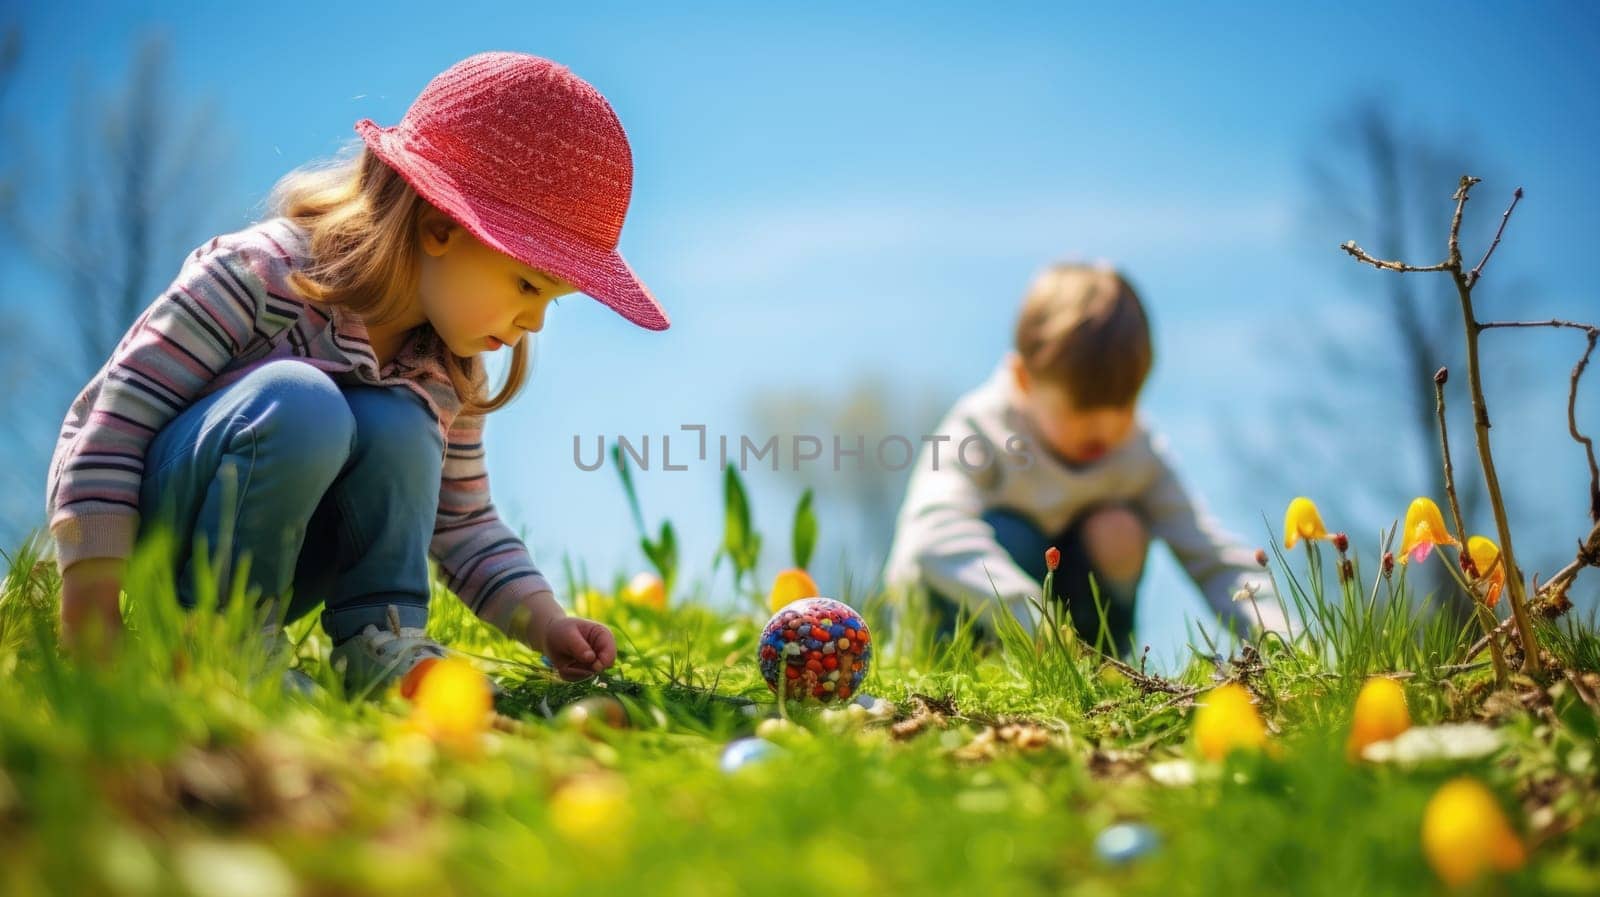 Two happy children hunting for Easter eggs in a lush green field on a sunny day by JuliaDorian